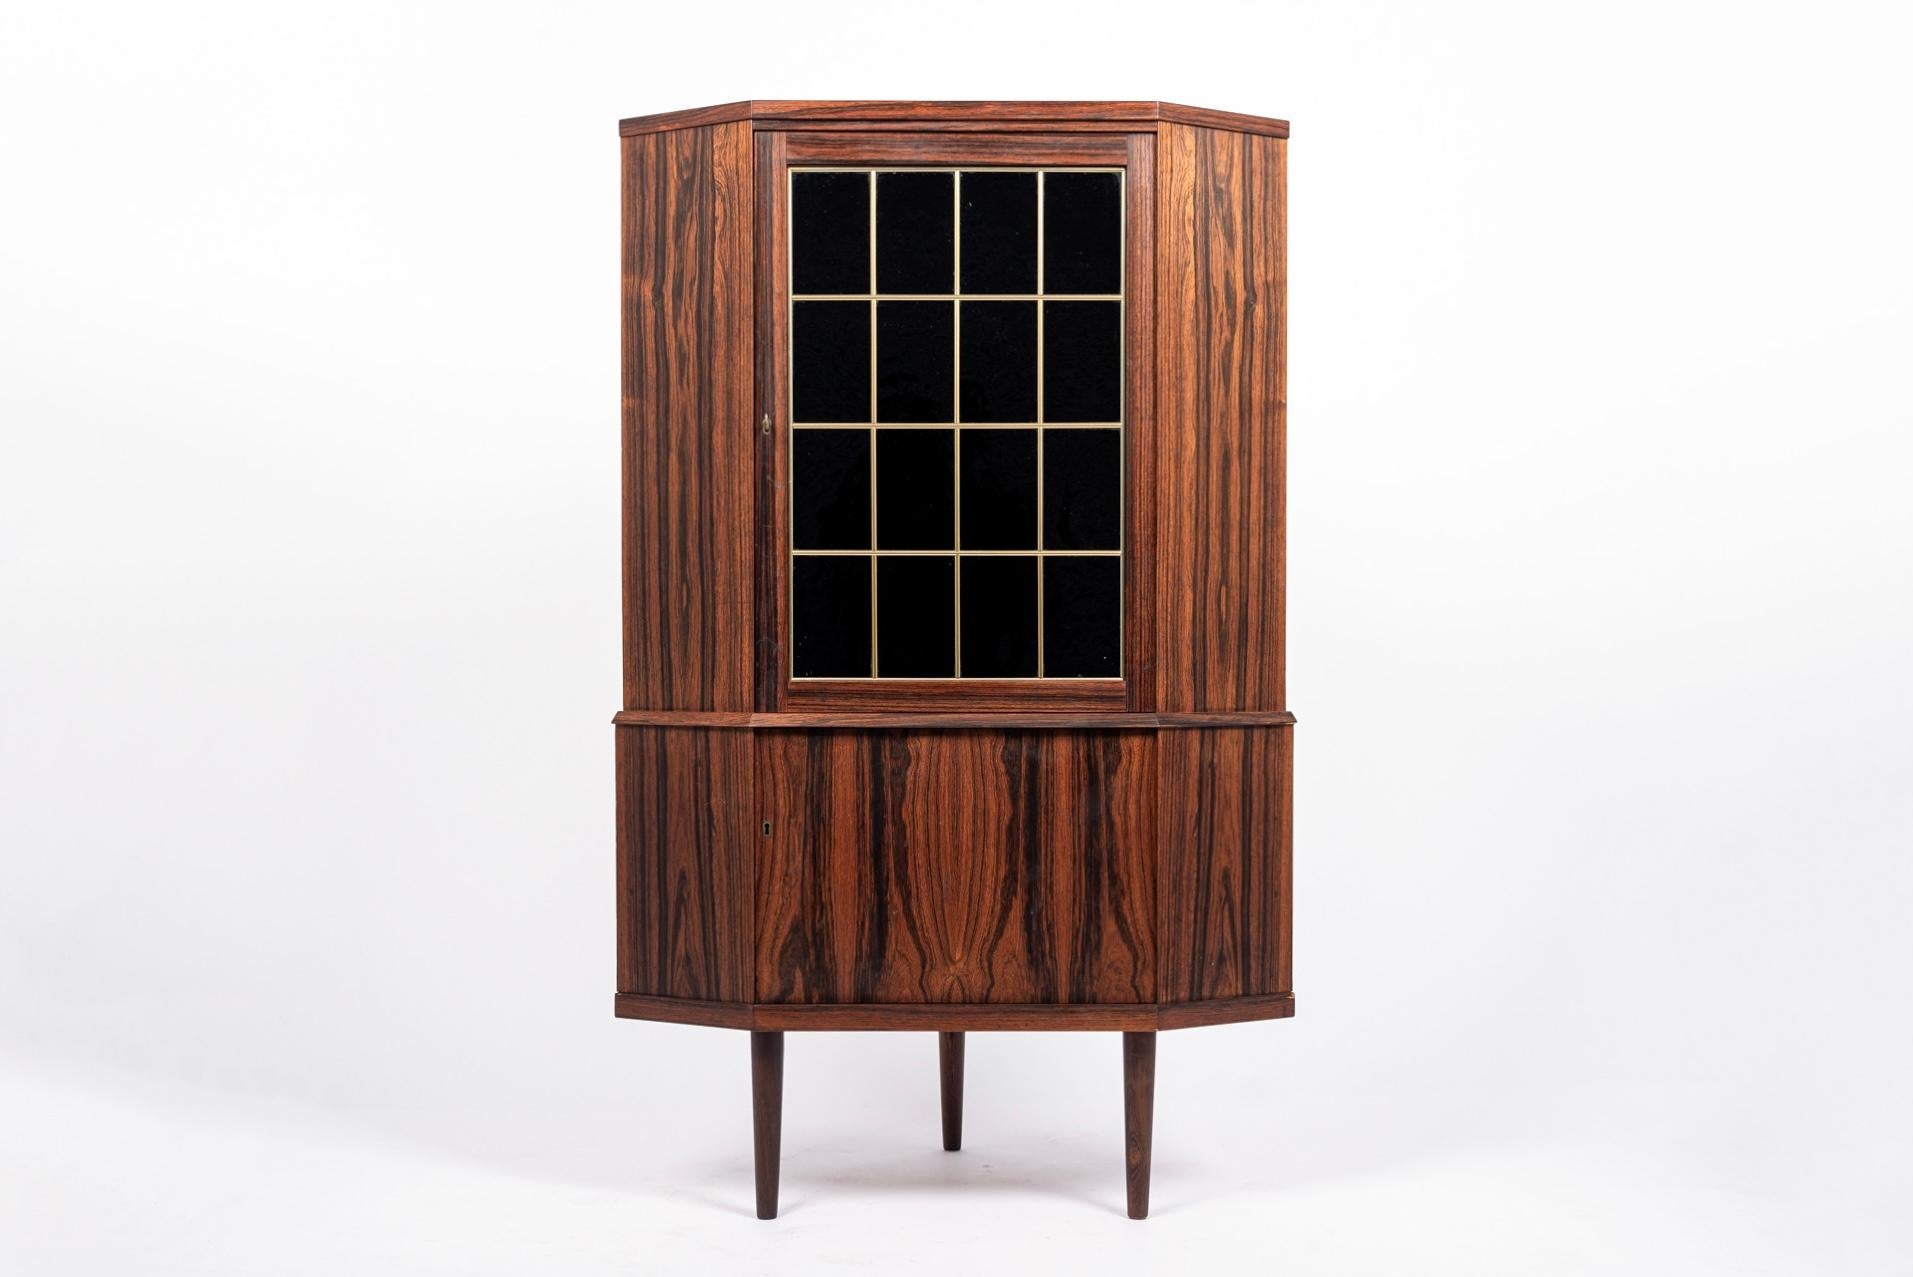 This vintage midcentury Danish modern rosewood corner bar cabinet is circa 1960. The Classic, Minimalist Scandinavian design has clean elegant lines and is well-crafted from rosewood with beautiful natural grain. The cabinet features a large tinted